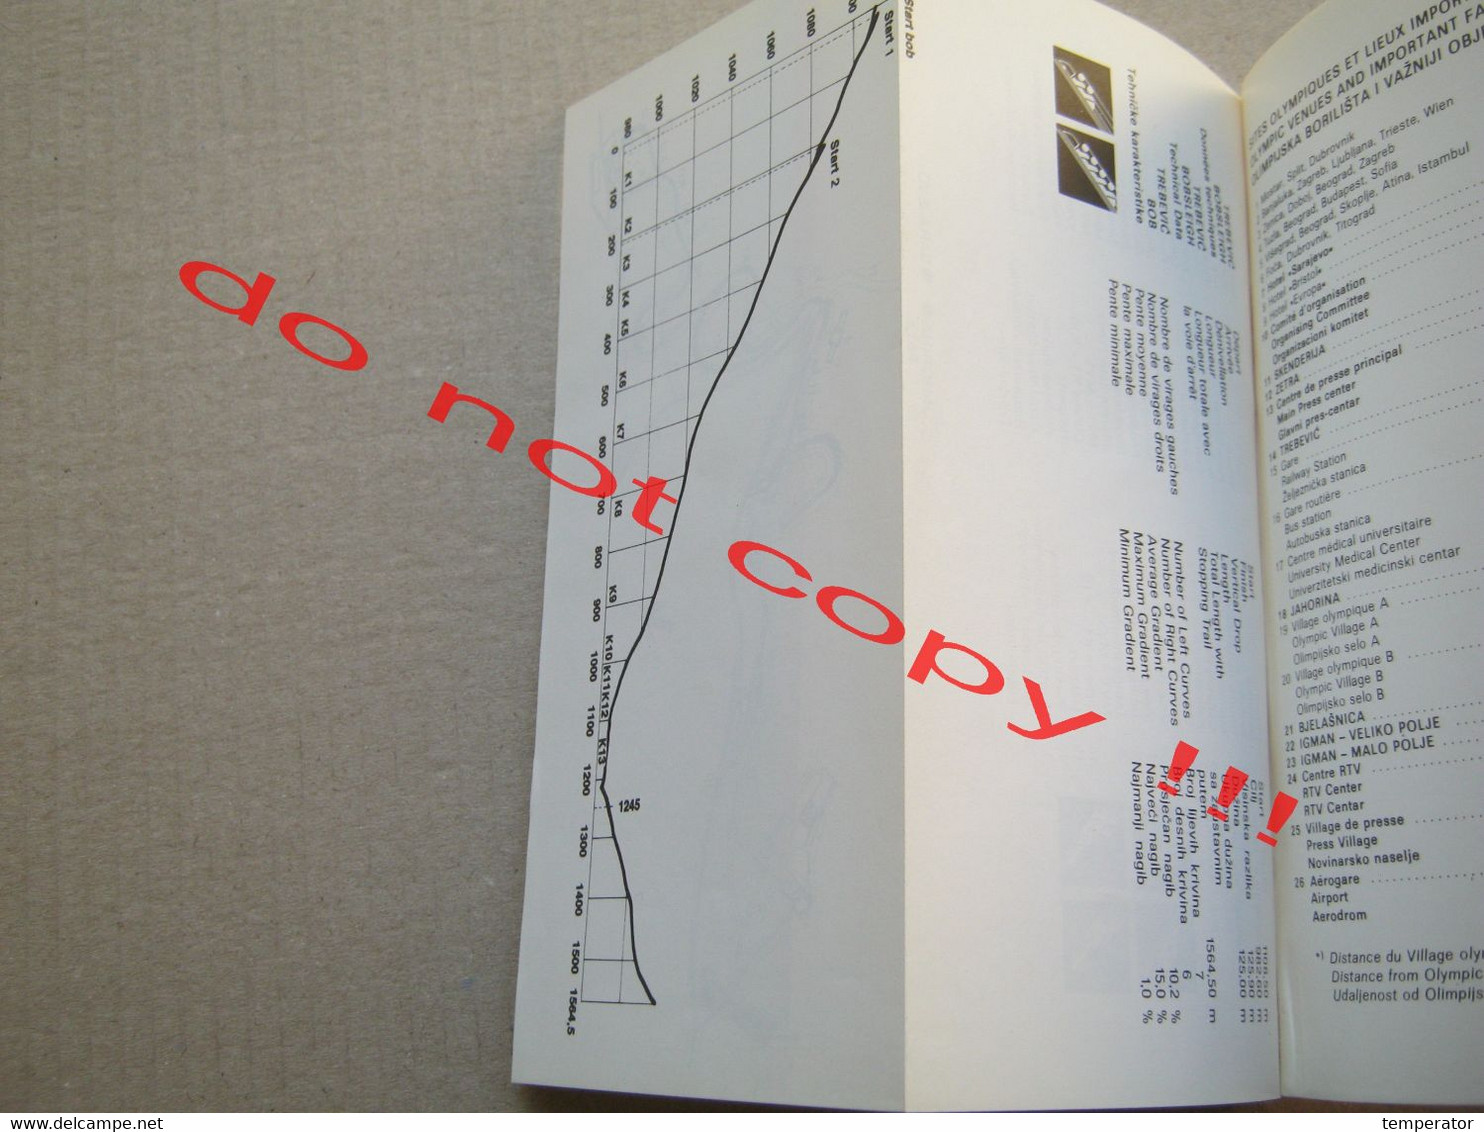 RRR OLYMPICS SARAJEVO 1984, COMPETITION RULES / XIV Olympic Winter Games / BOB BOBSLEIGH ( 82 pages+2 maps )